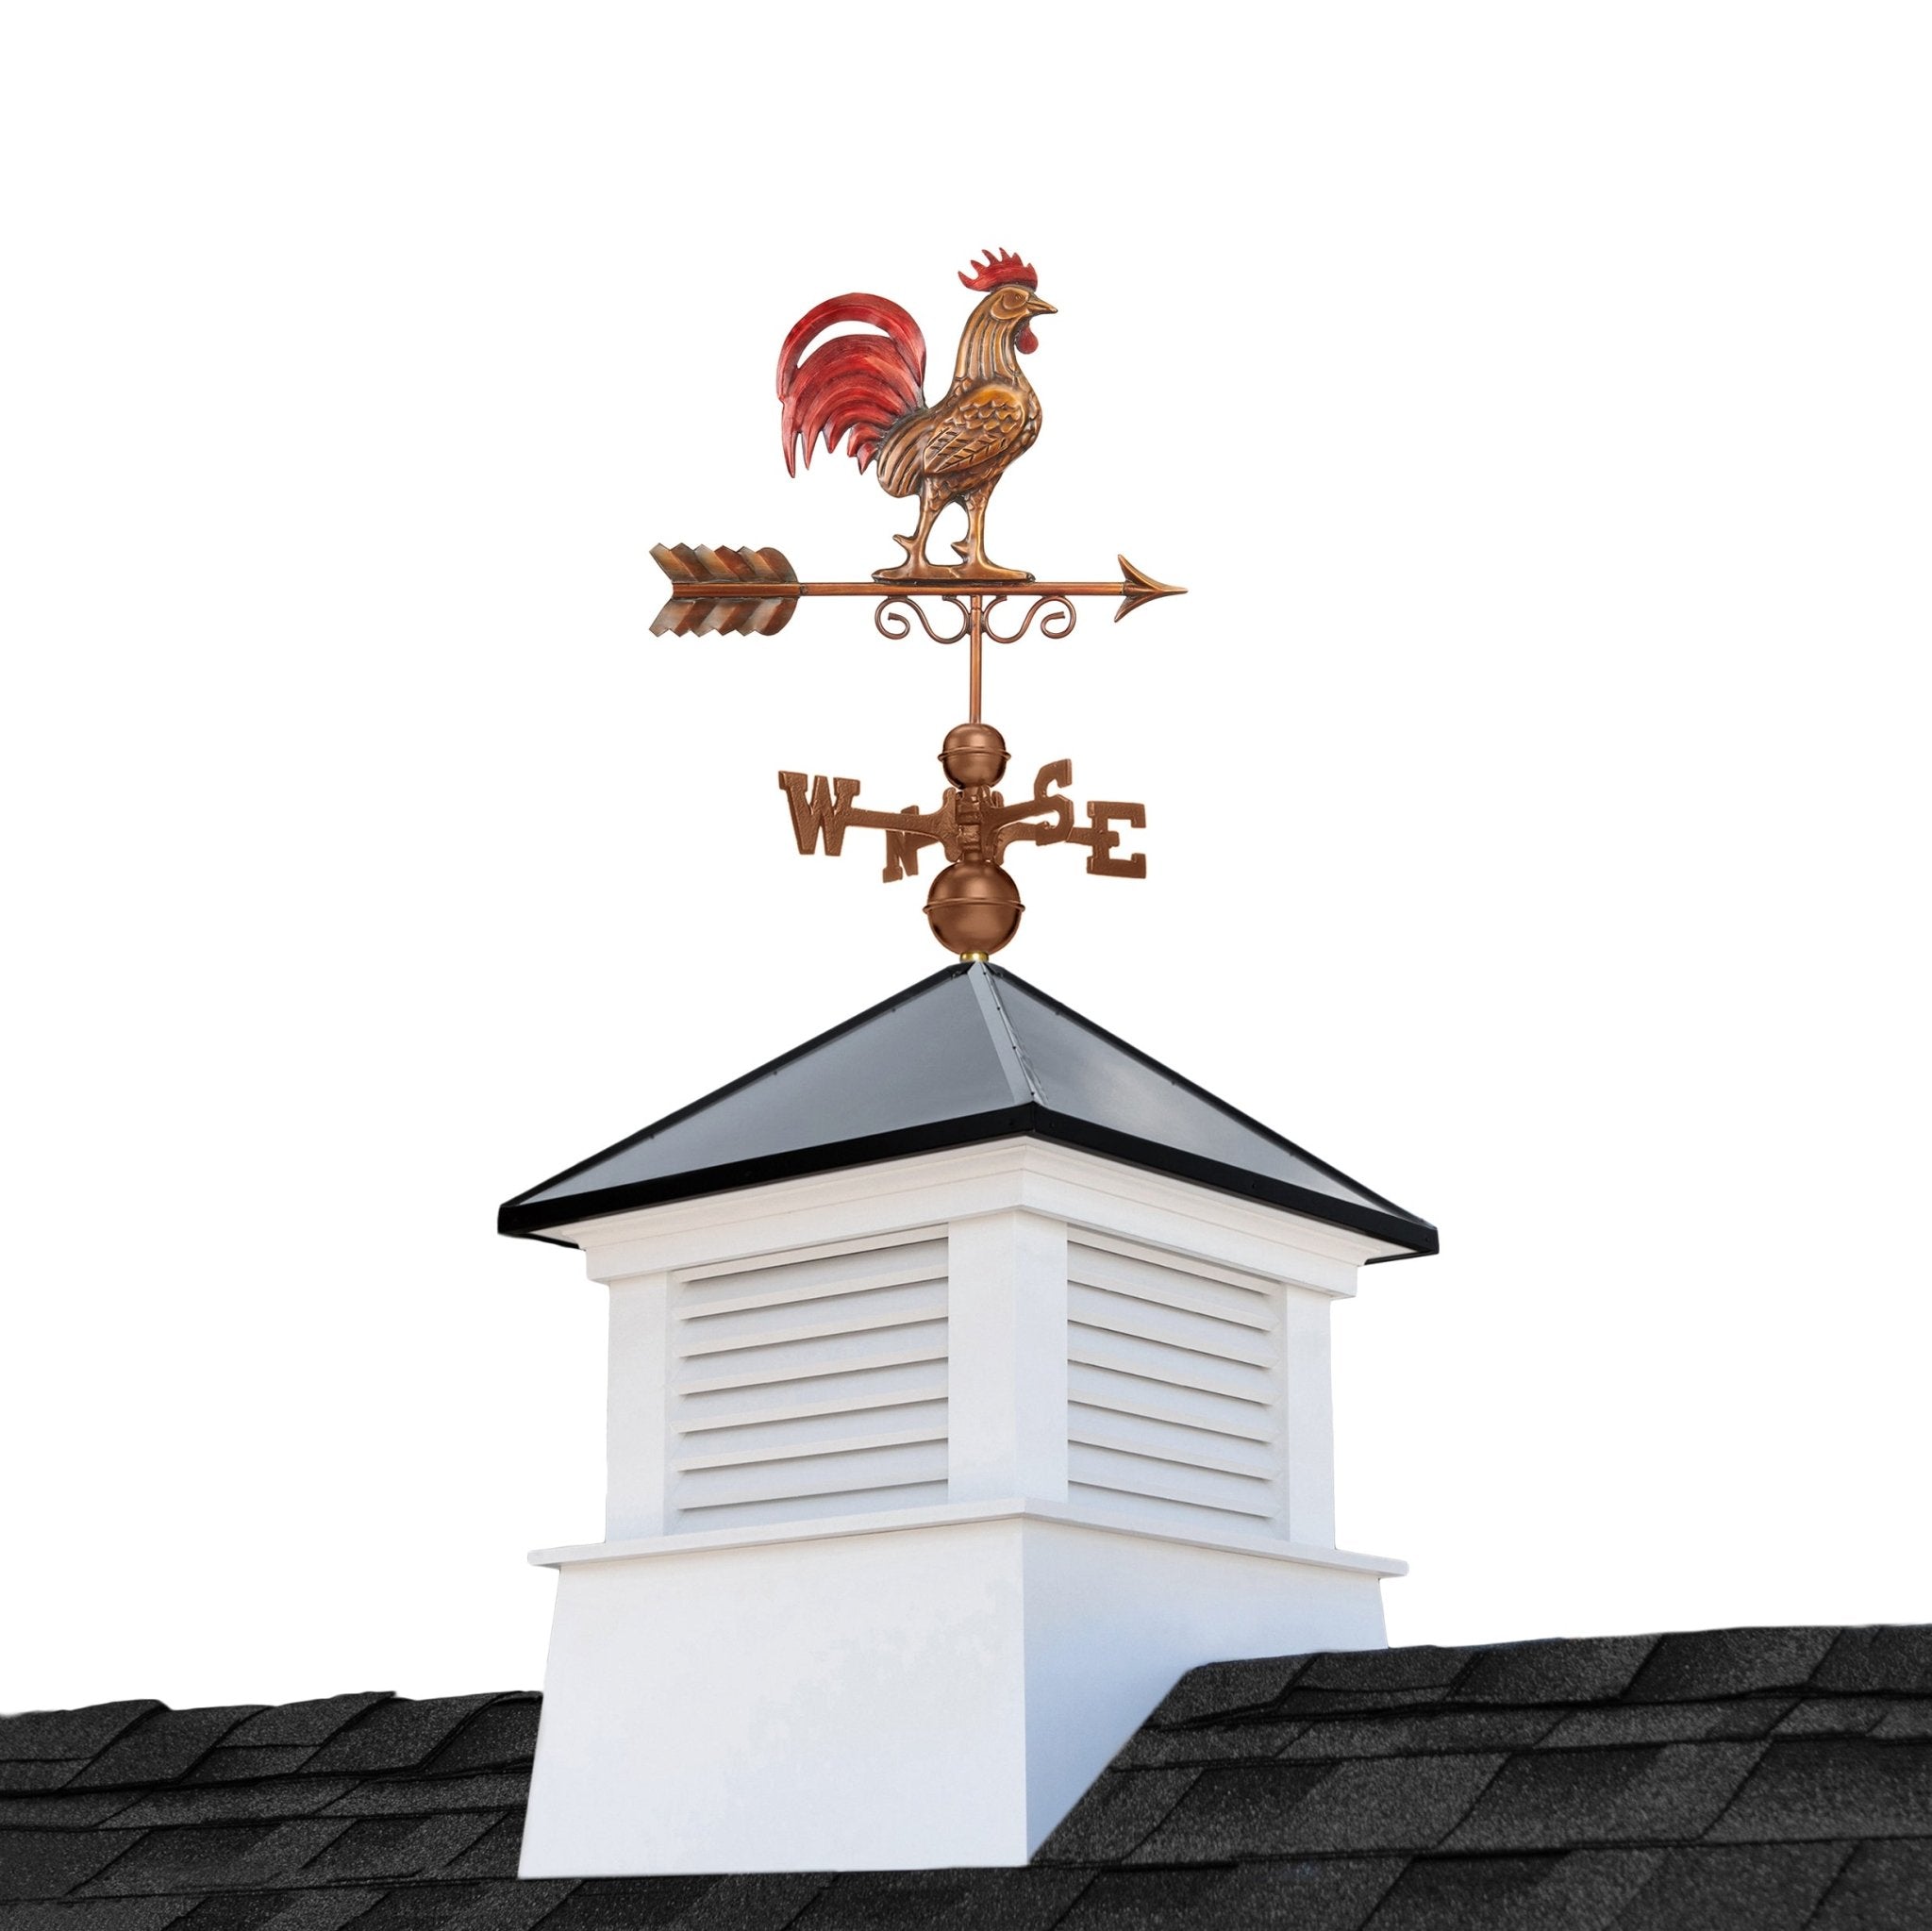 26" Square Manchester Vinyl Cupola with Black Aluminum Roof and Red Rooster Weathervane by Good Directions - Good Directions